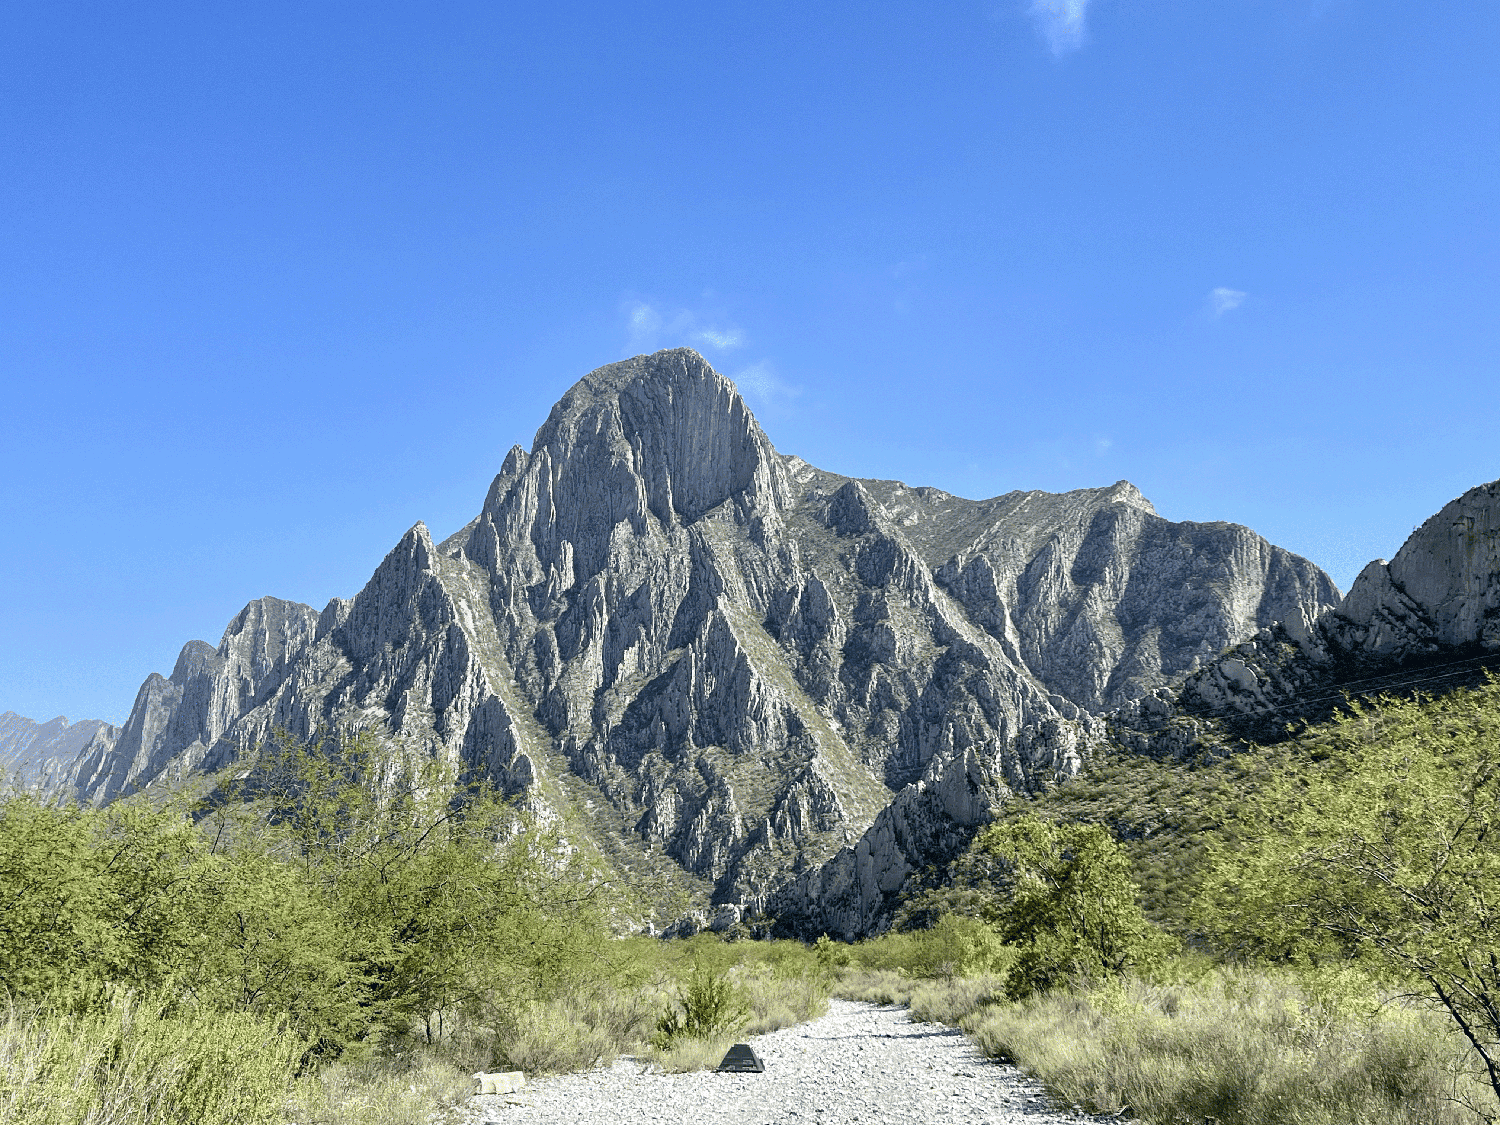 Mountains under a blue sky with green vegetation on the ground.